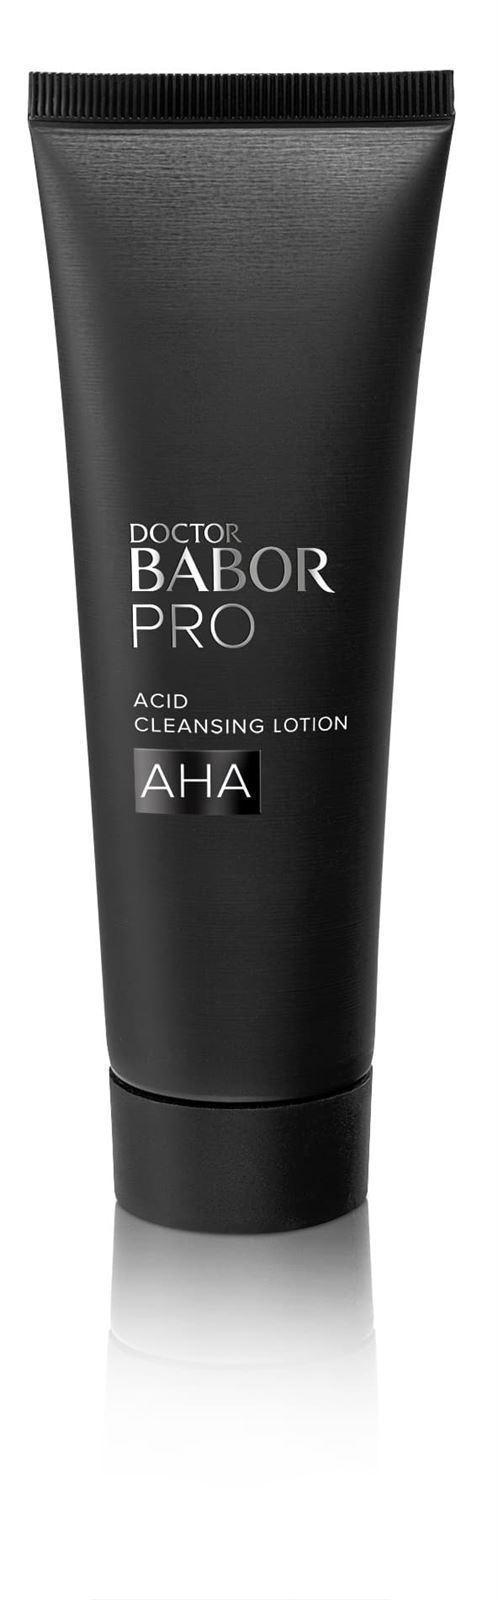 AHA CLEANSING LOTION - Imagen 1